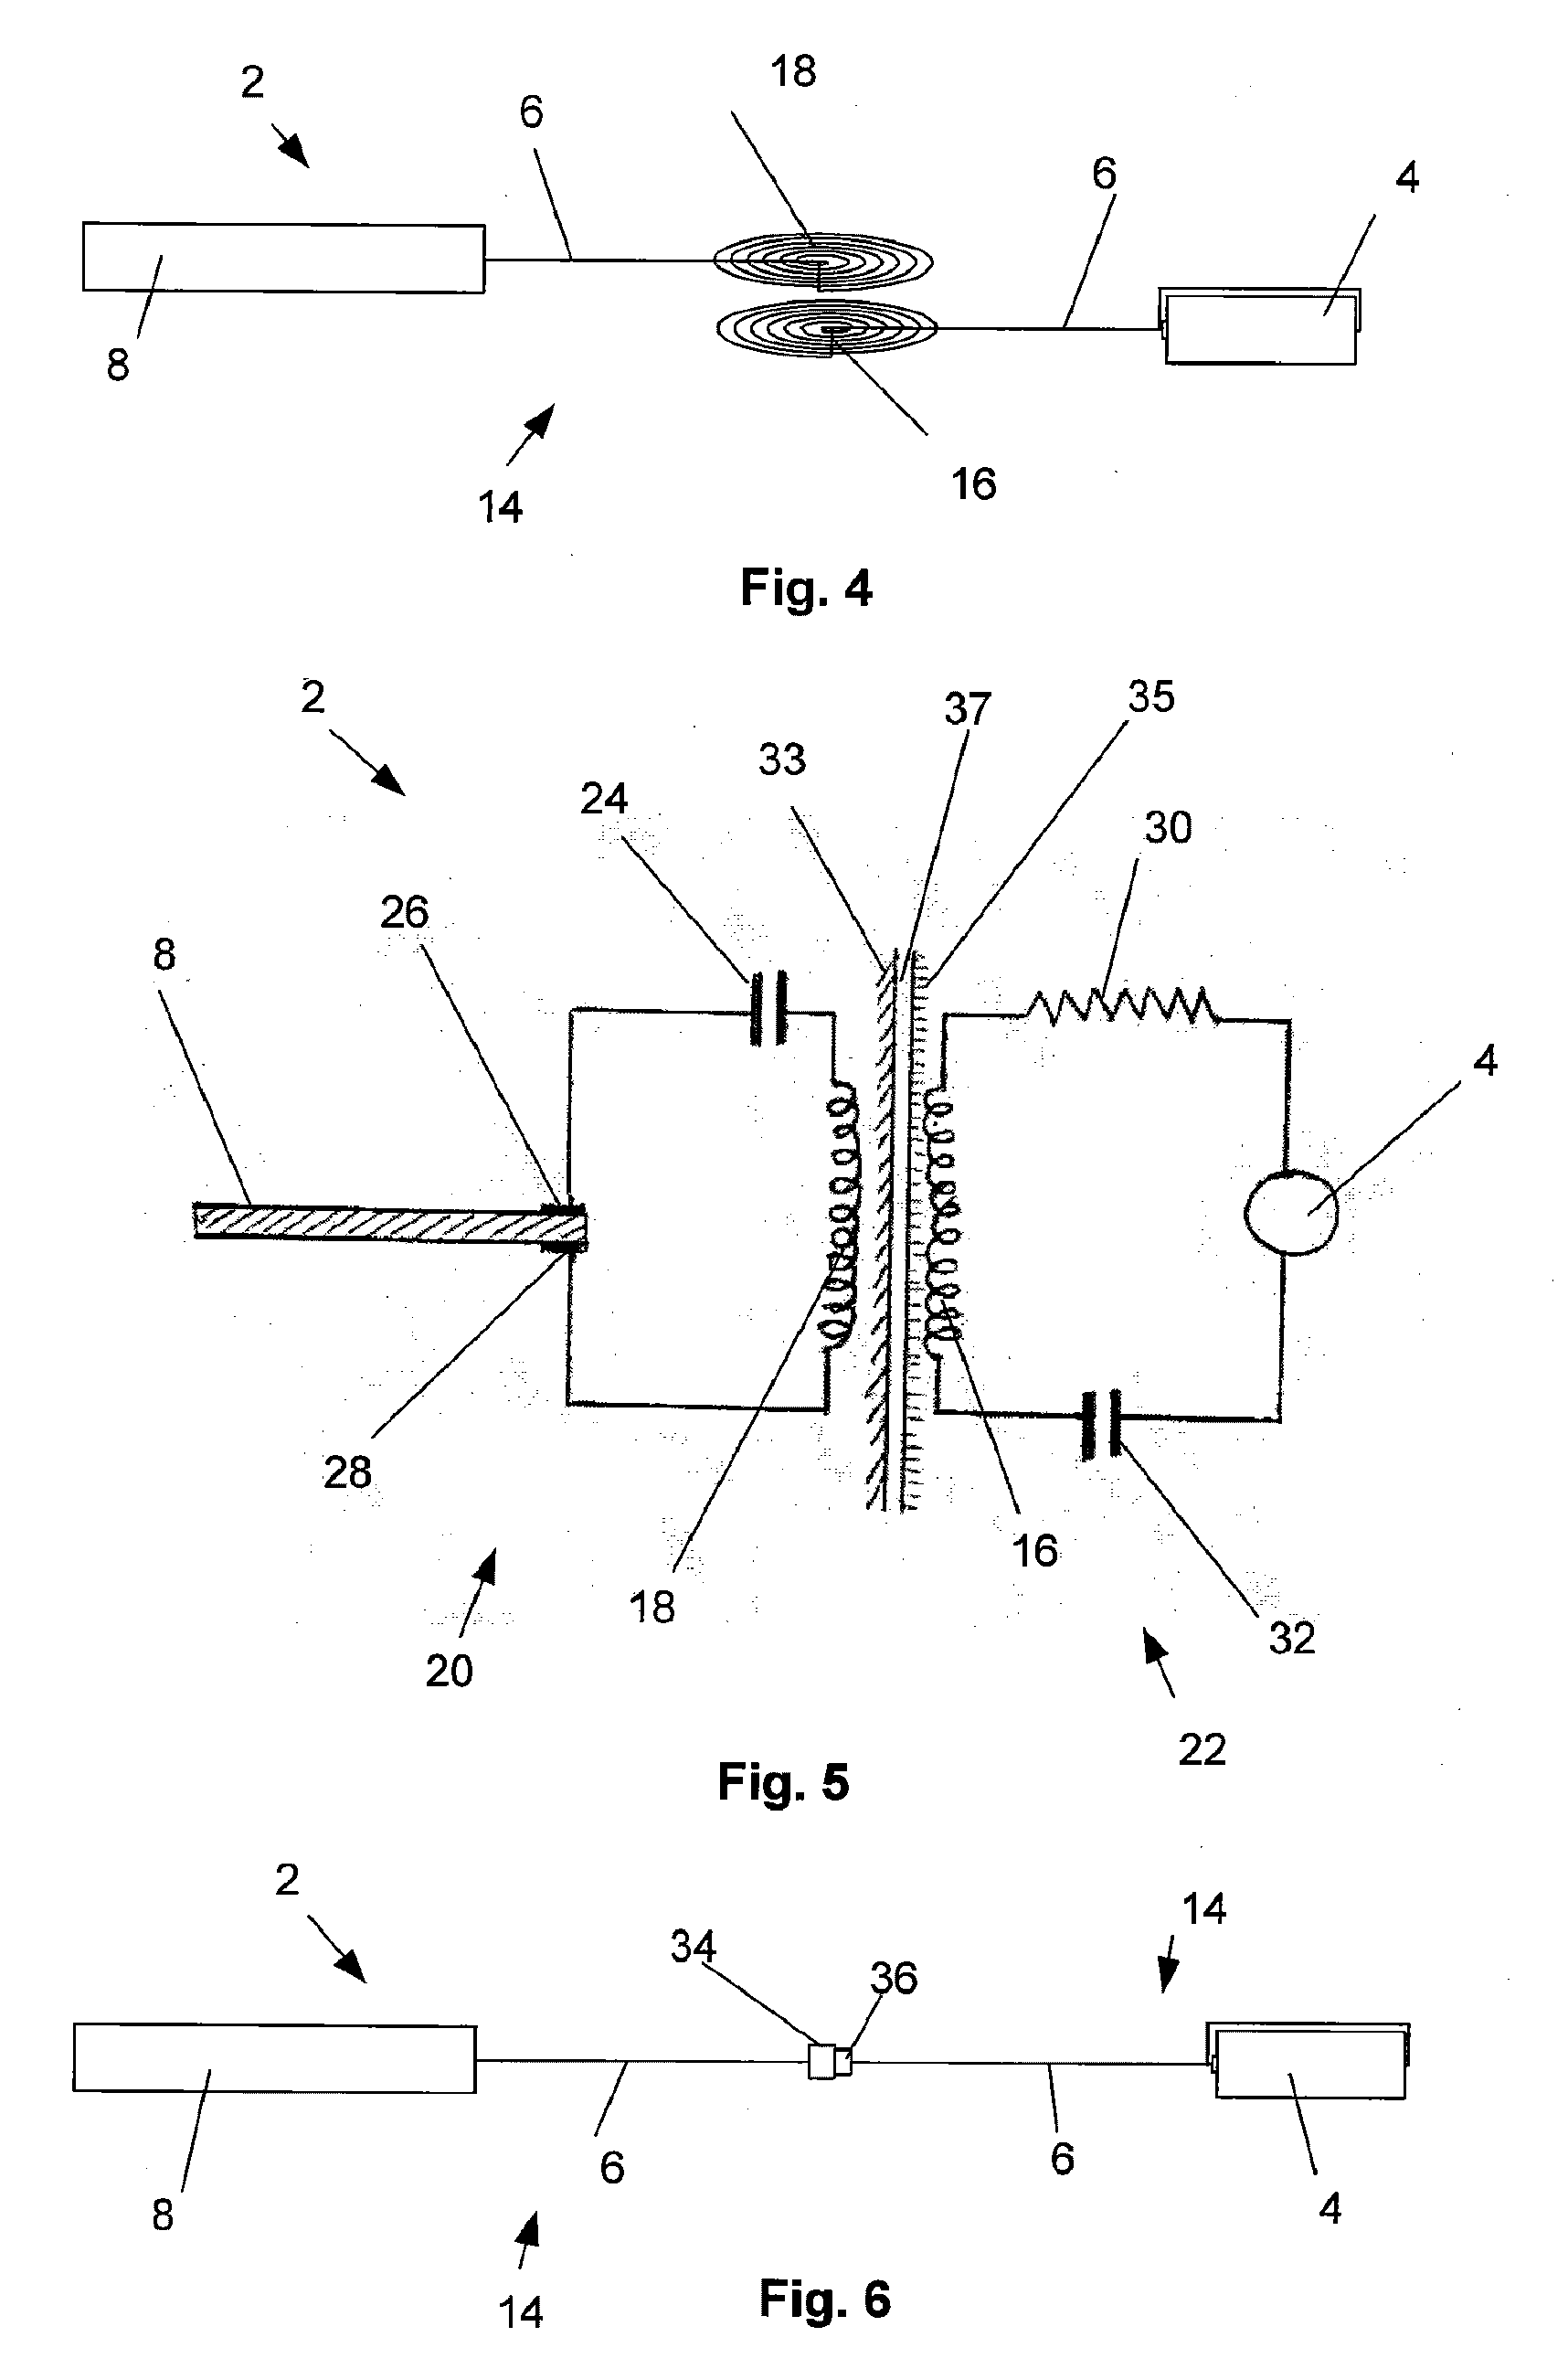 Tethered Airway Implants and Methods of Using the Same